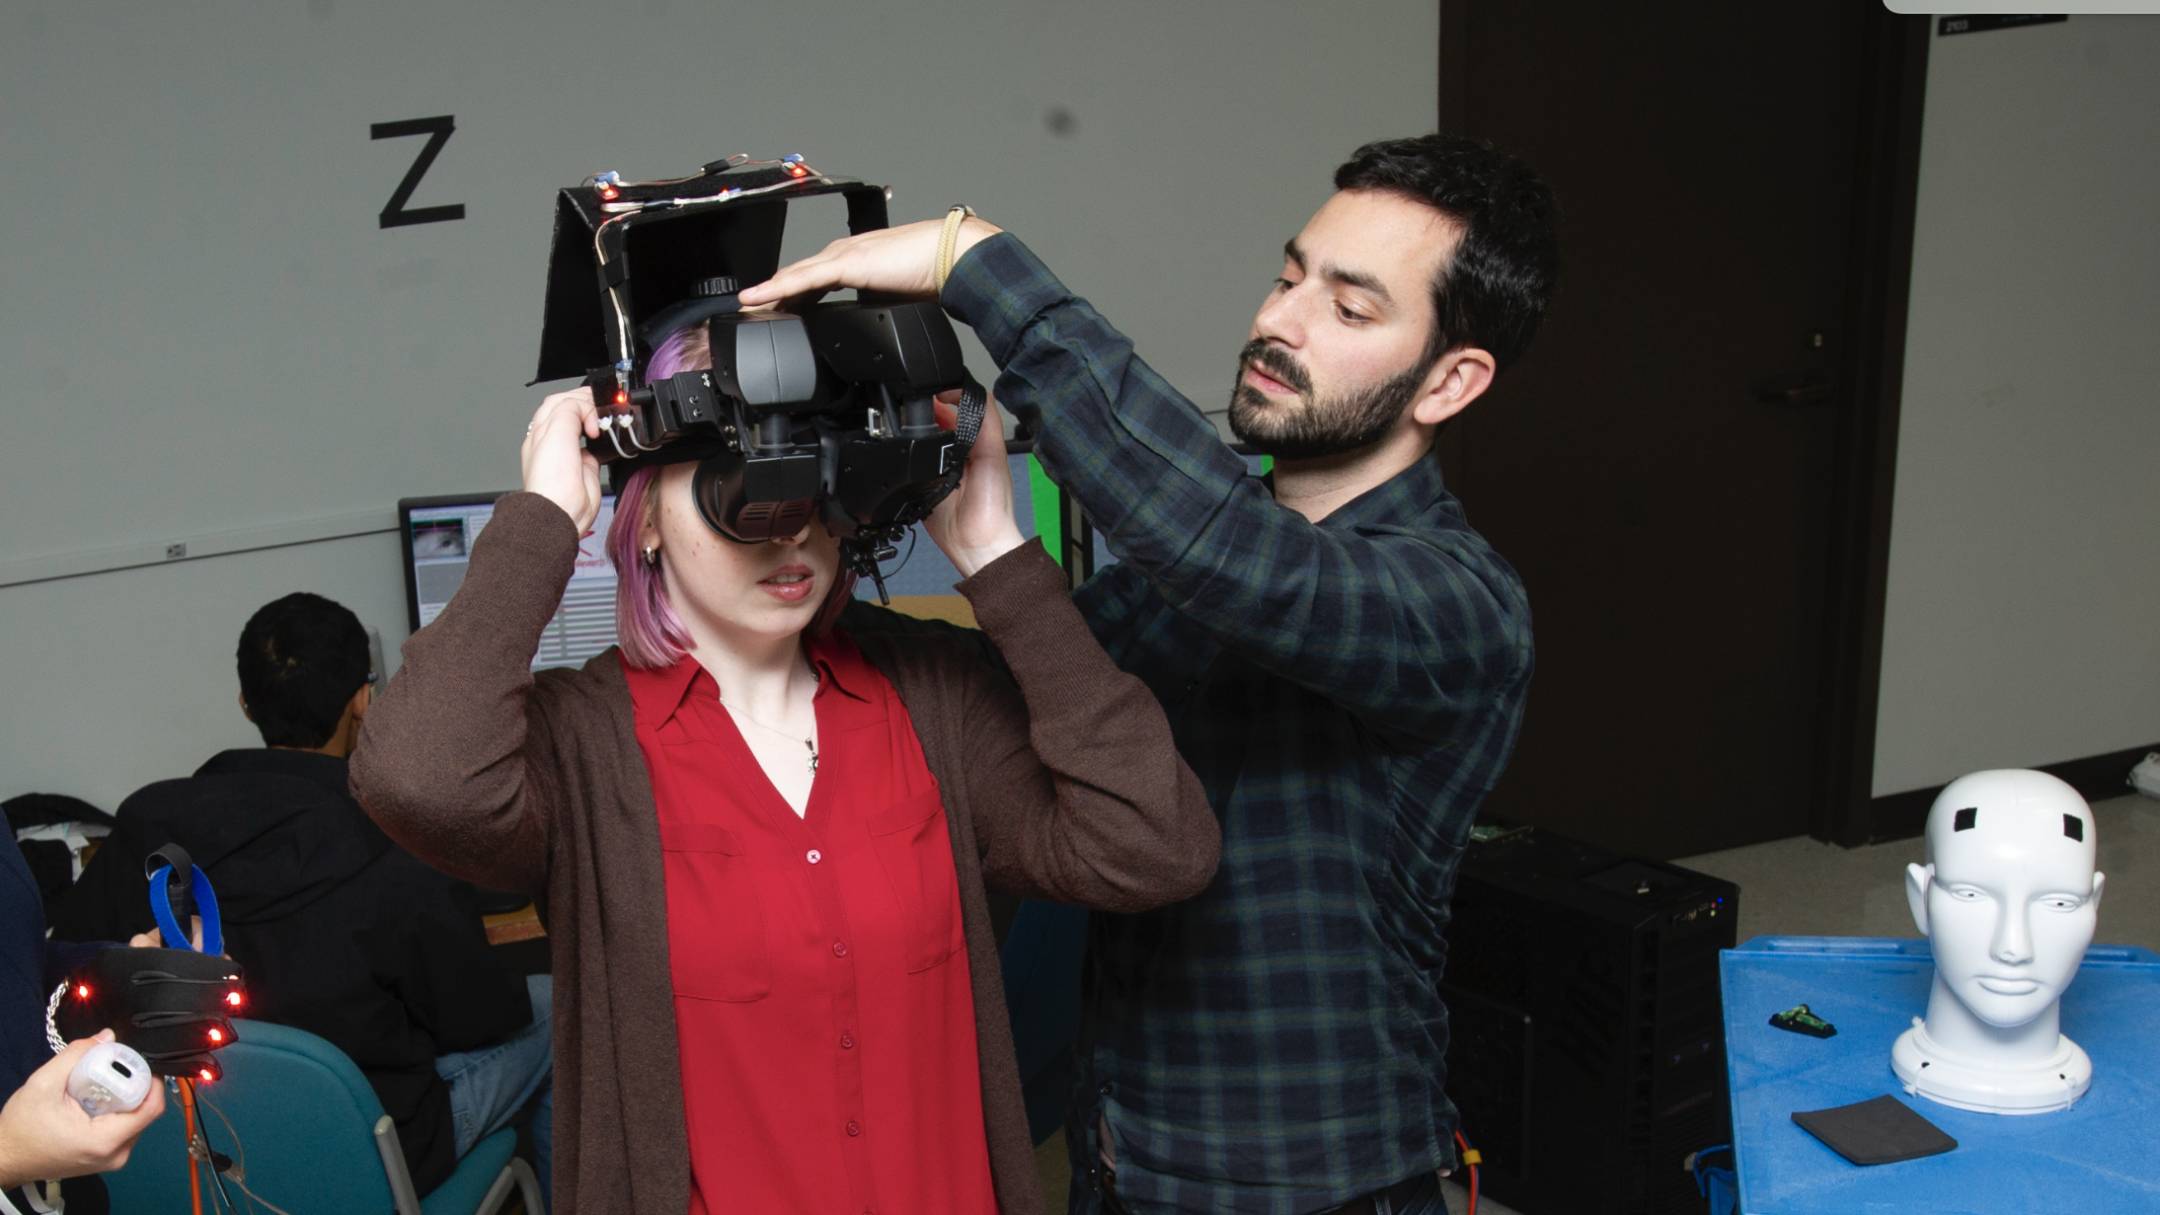 Woman in a red shirt getting fitted for VR goggles